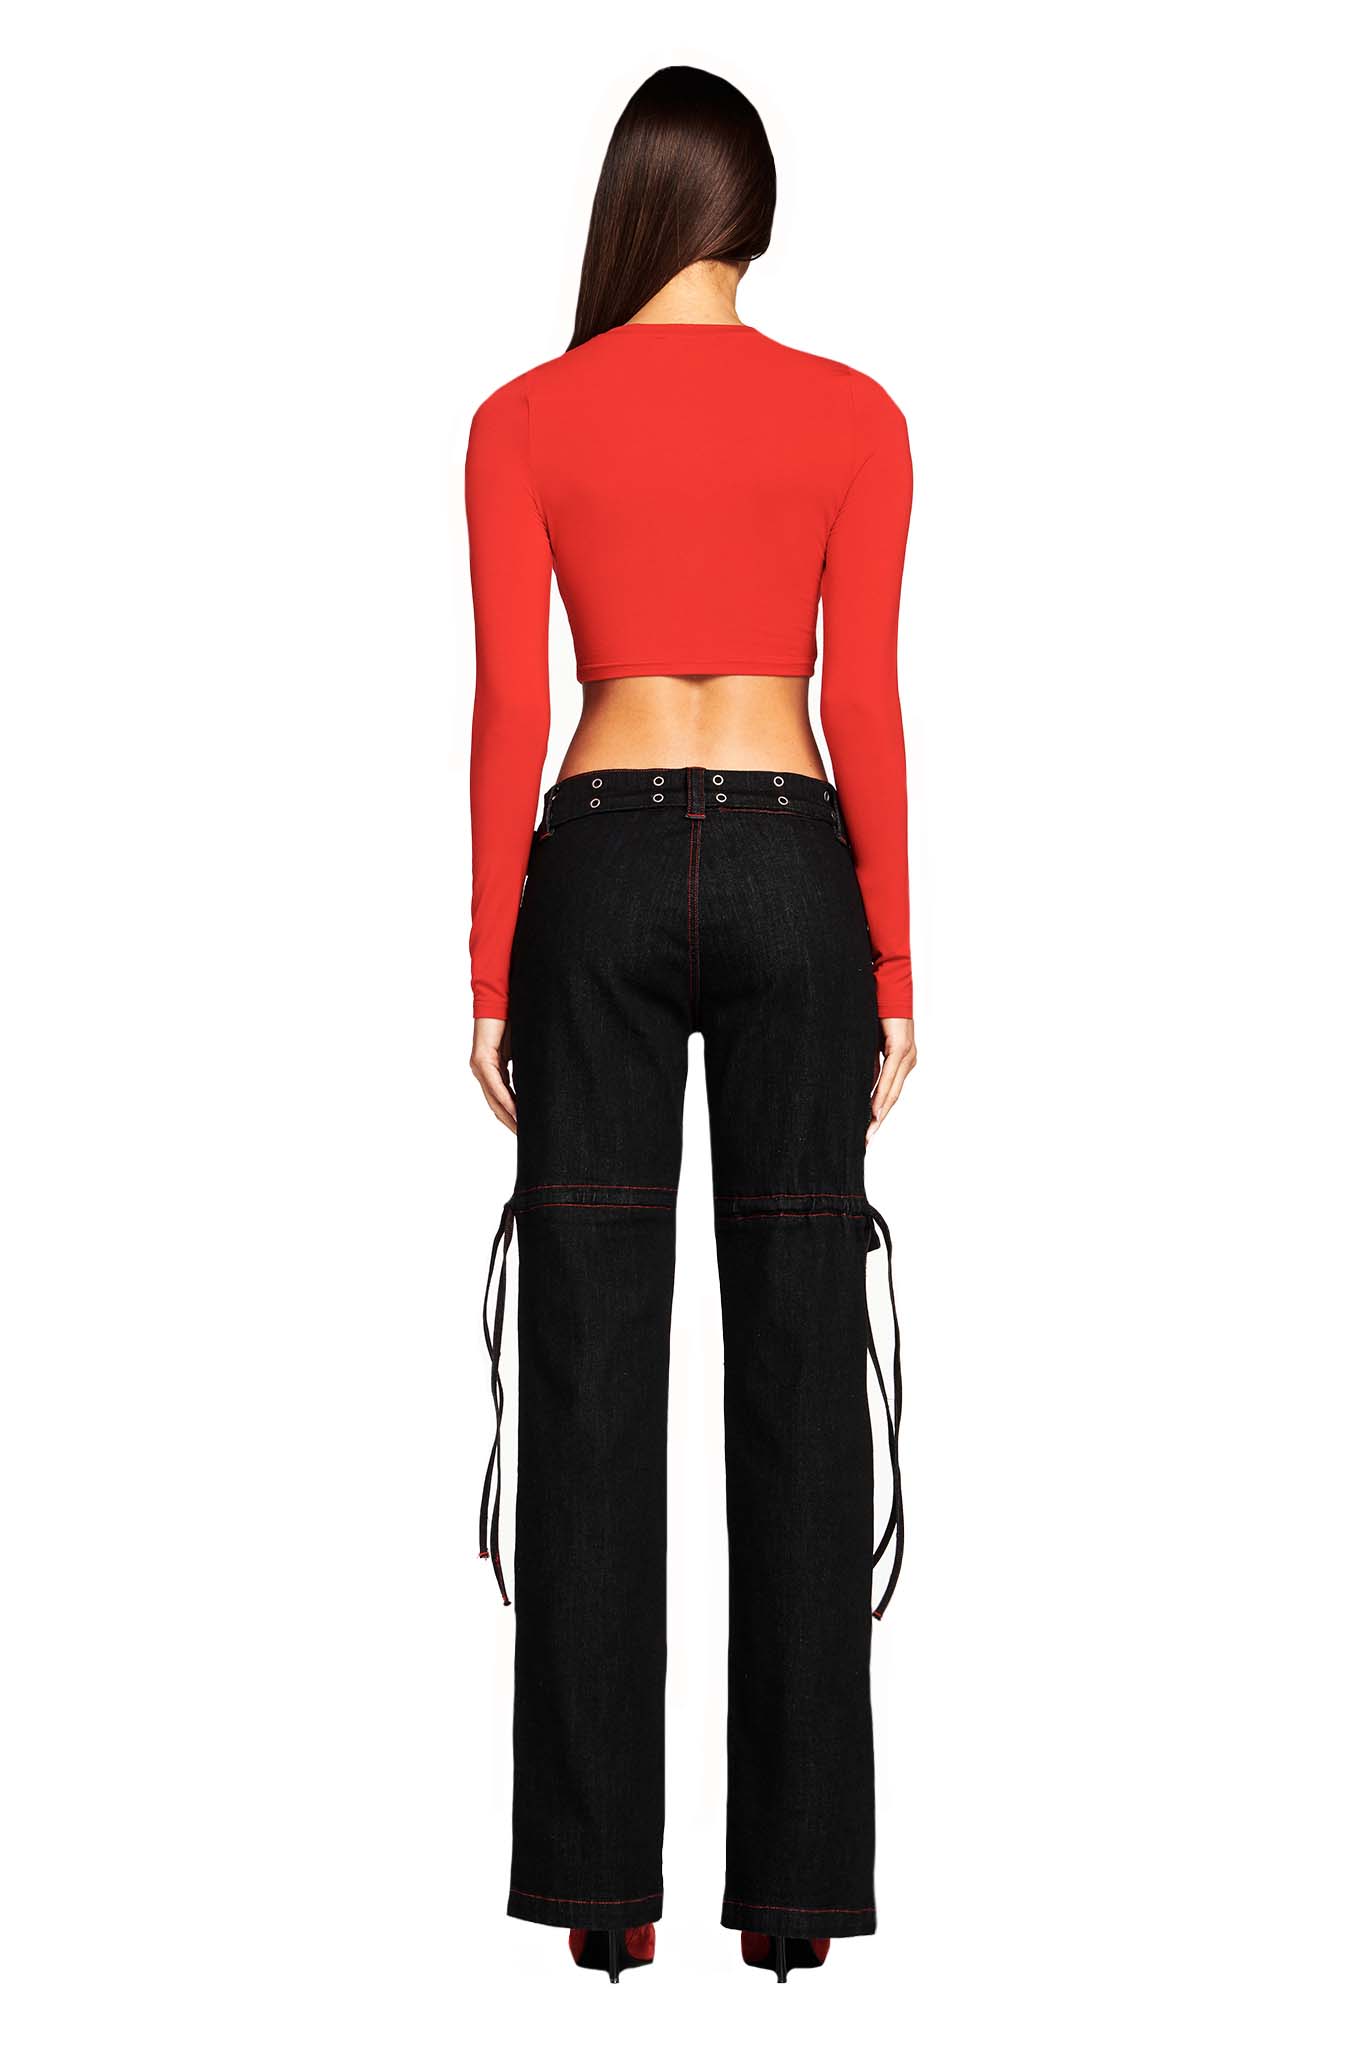 NAIMA CARGO PANT - BLACK WITH RED